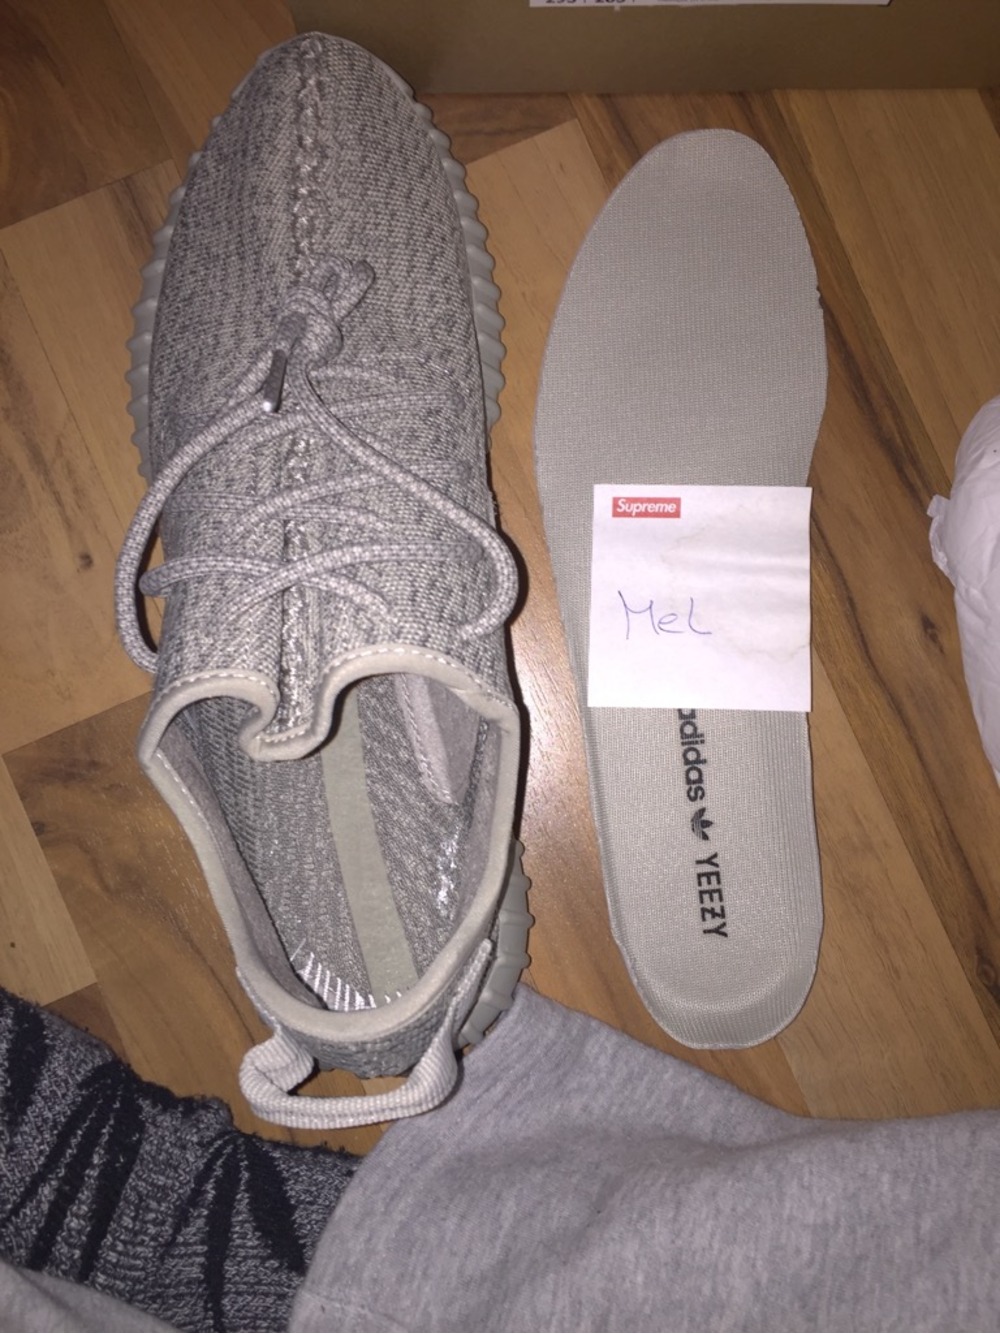 The adidas YEEZY BOOST 350 in 